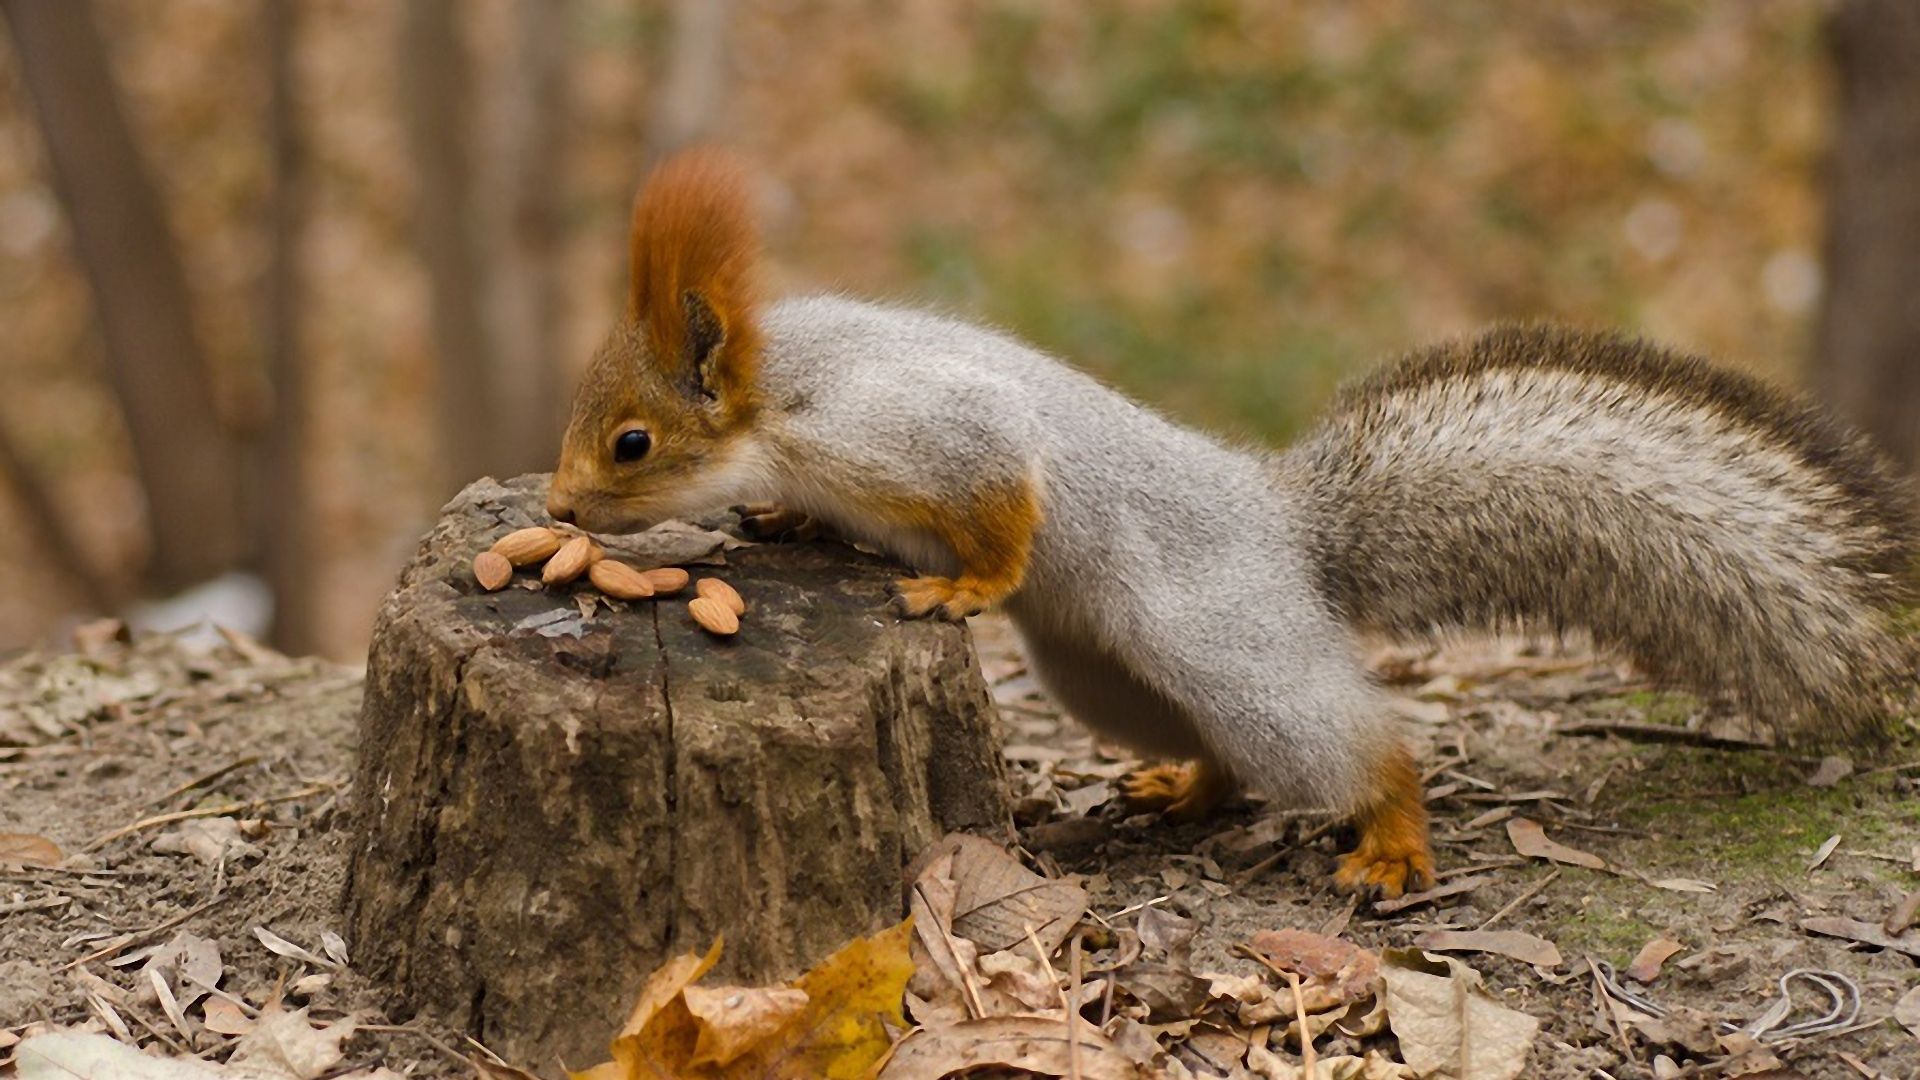 Download Wallpaper 1920x1080 squirrel, nuts, autumn, leaves, tree stump Full HD 1080p HD Background